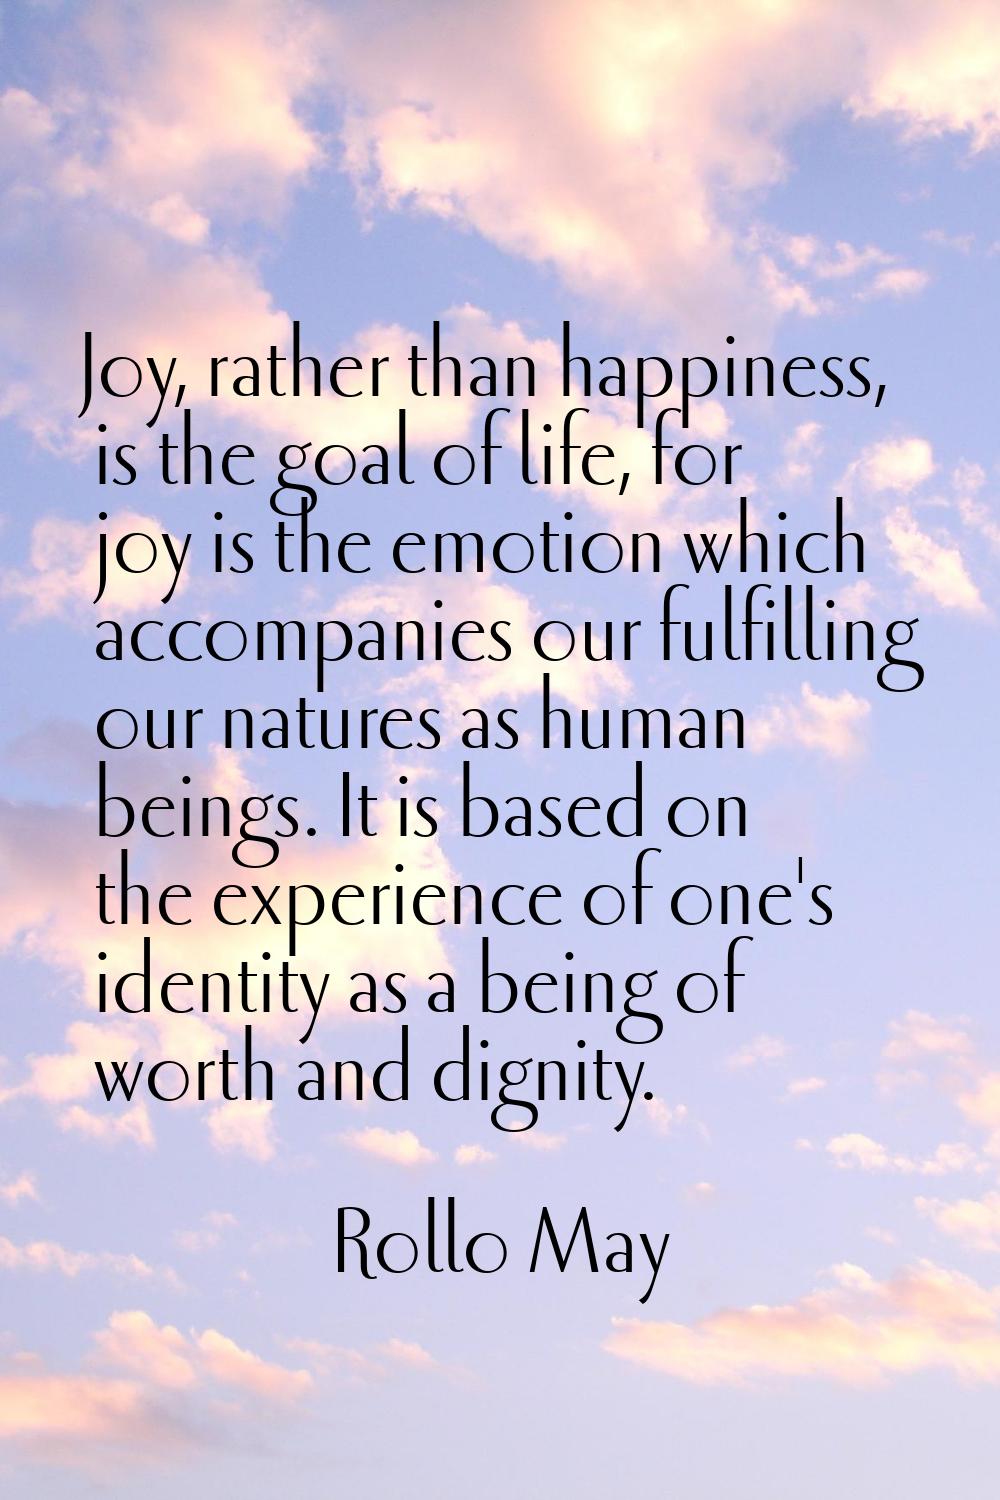 Joy, rather than happiness, is the goal of life, for joy is the emotion which accompanies our fulfi